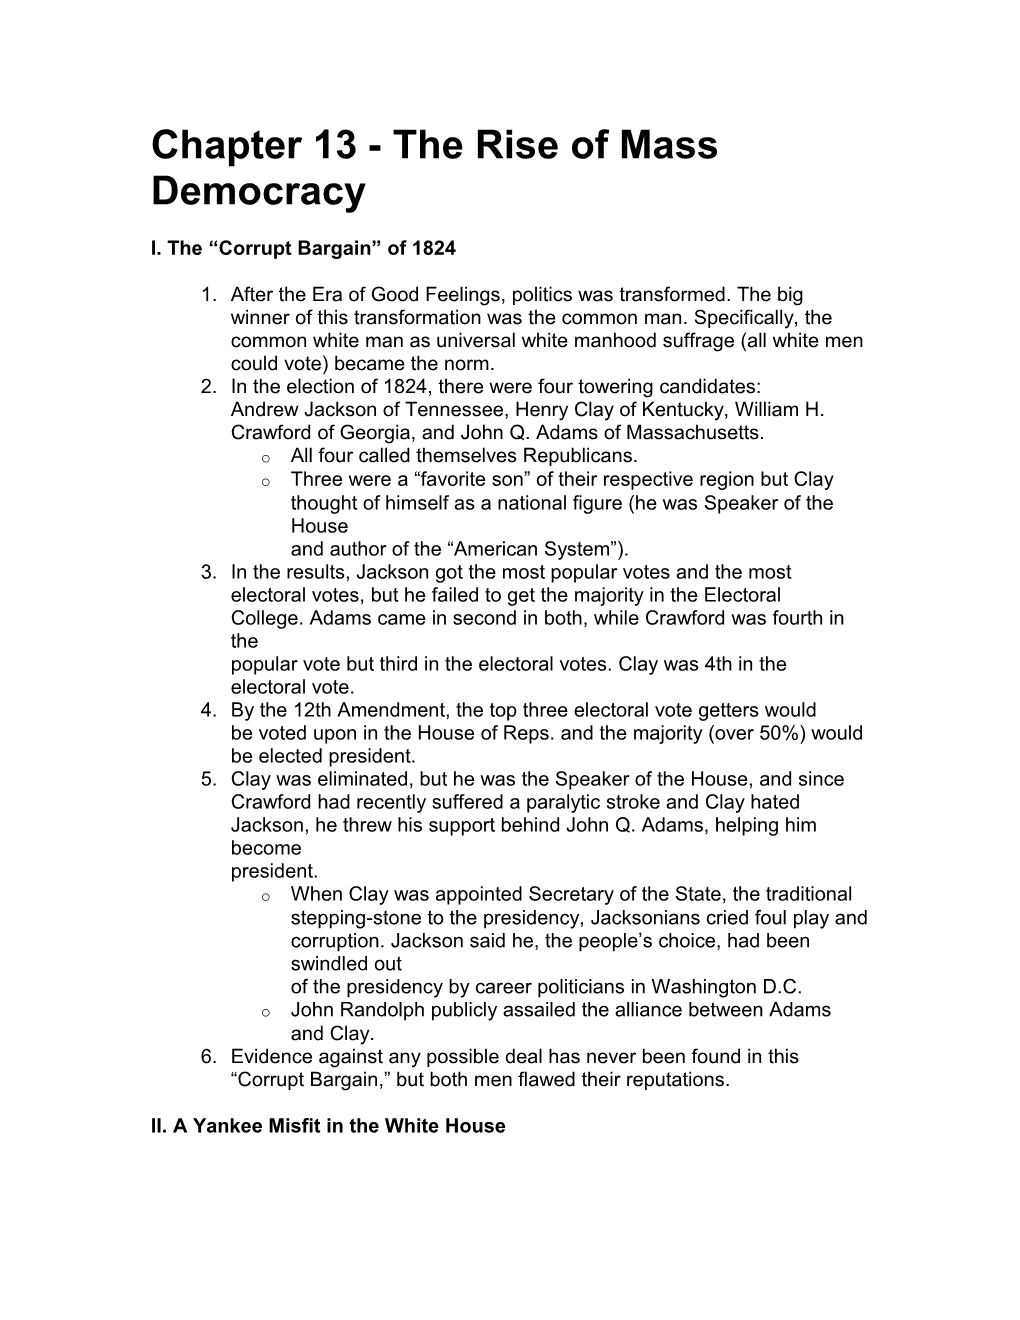 Chapter 13 - the Rise of Mass Democracy